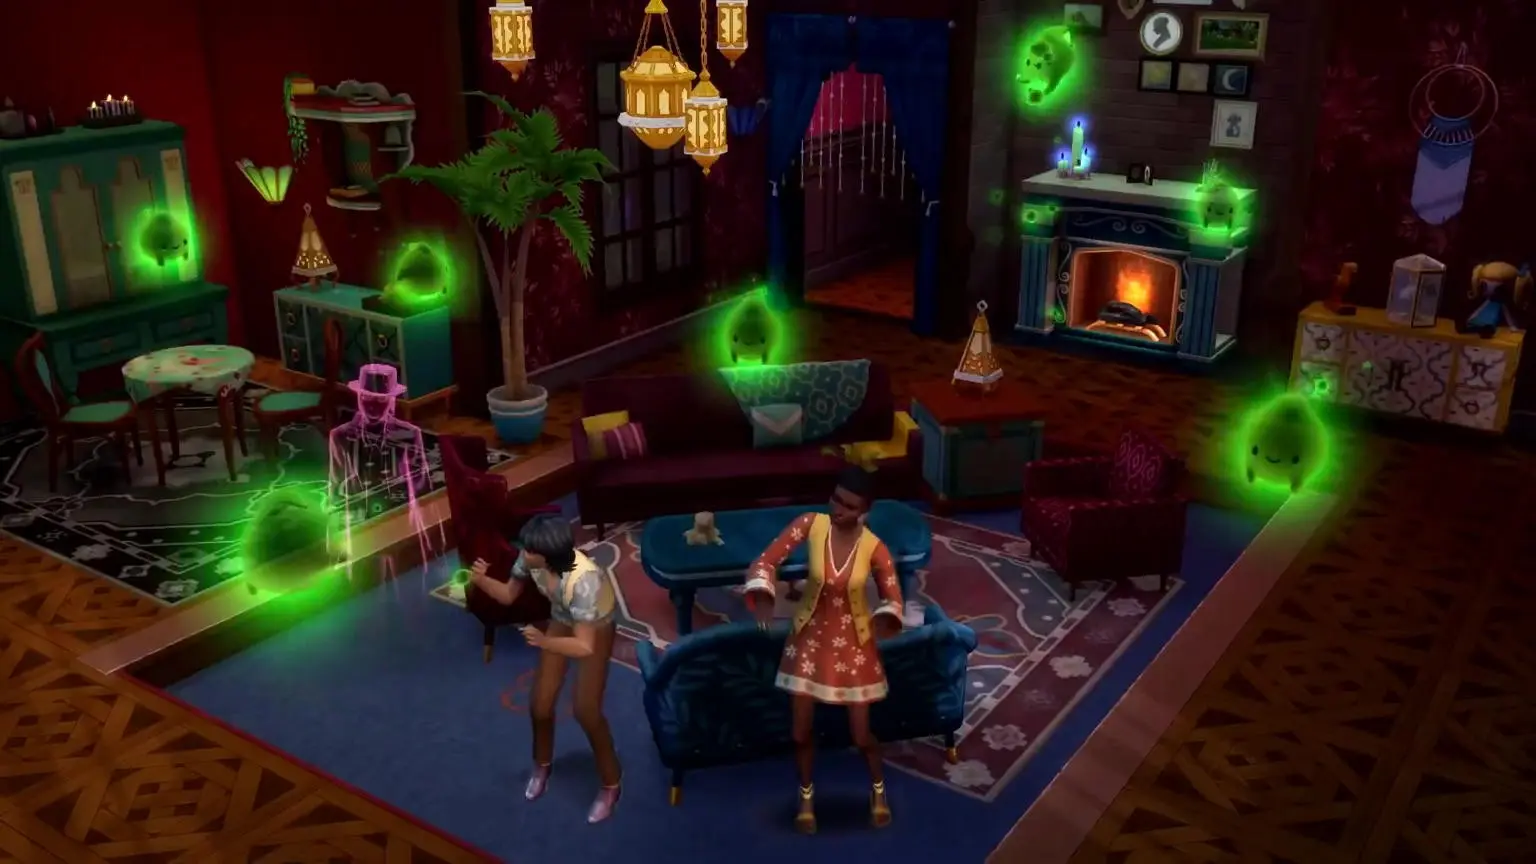 The Sims 4 - Paranormal is already available